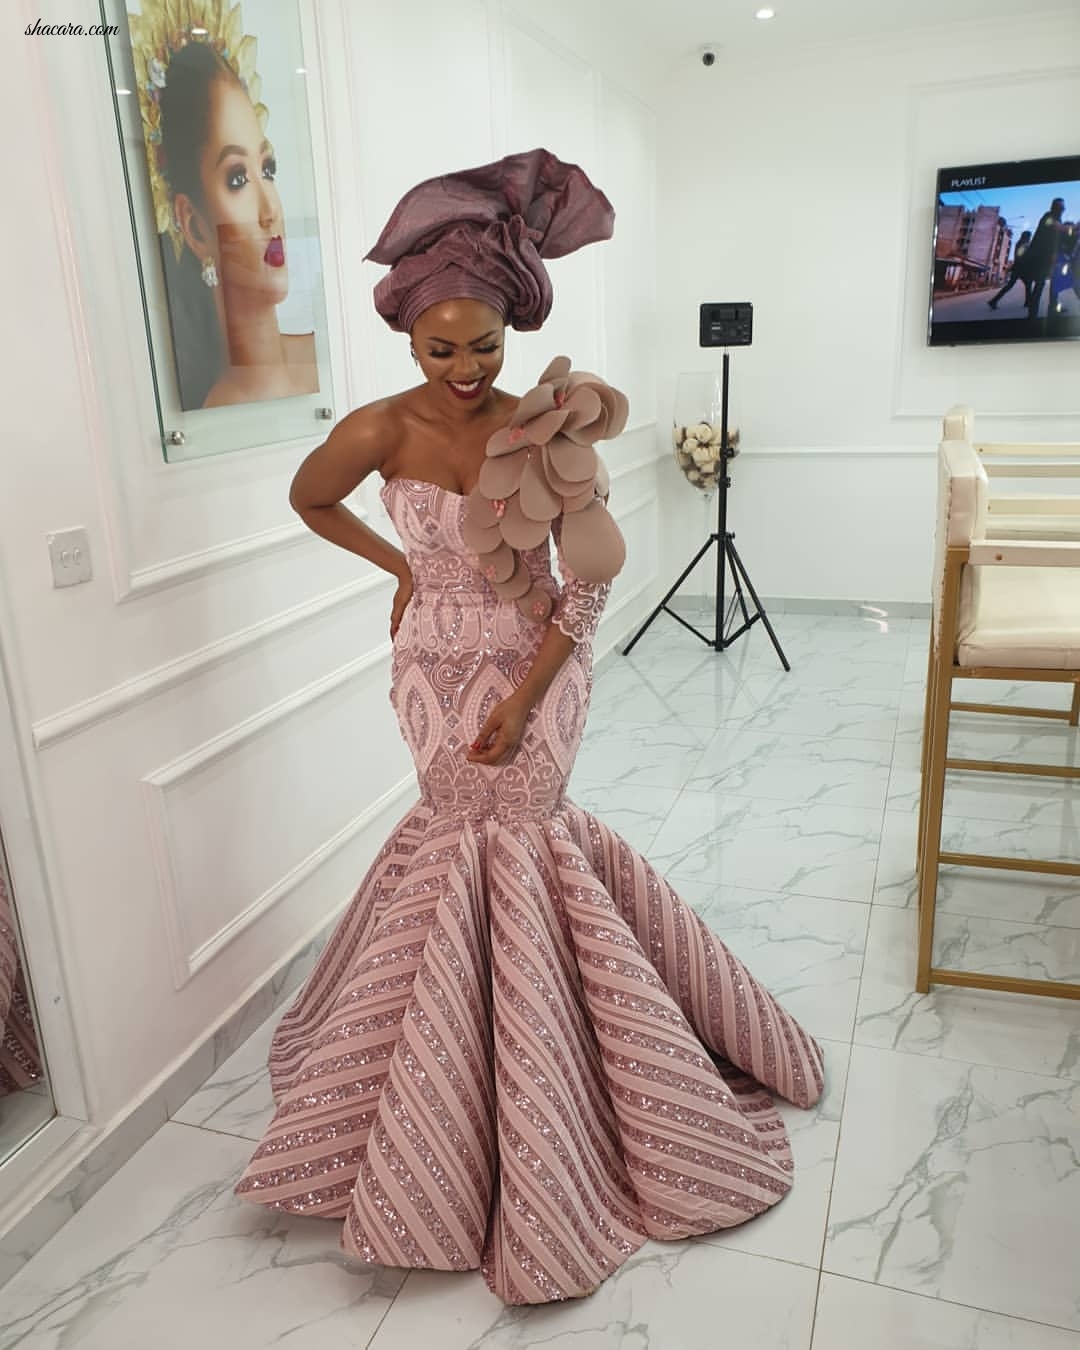 Life-Size Barbie! Chidinma Ekile Is A Vision In This Scene-Stealing Mermaid Dress